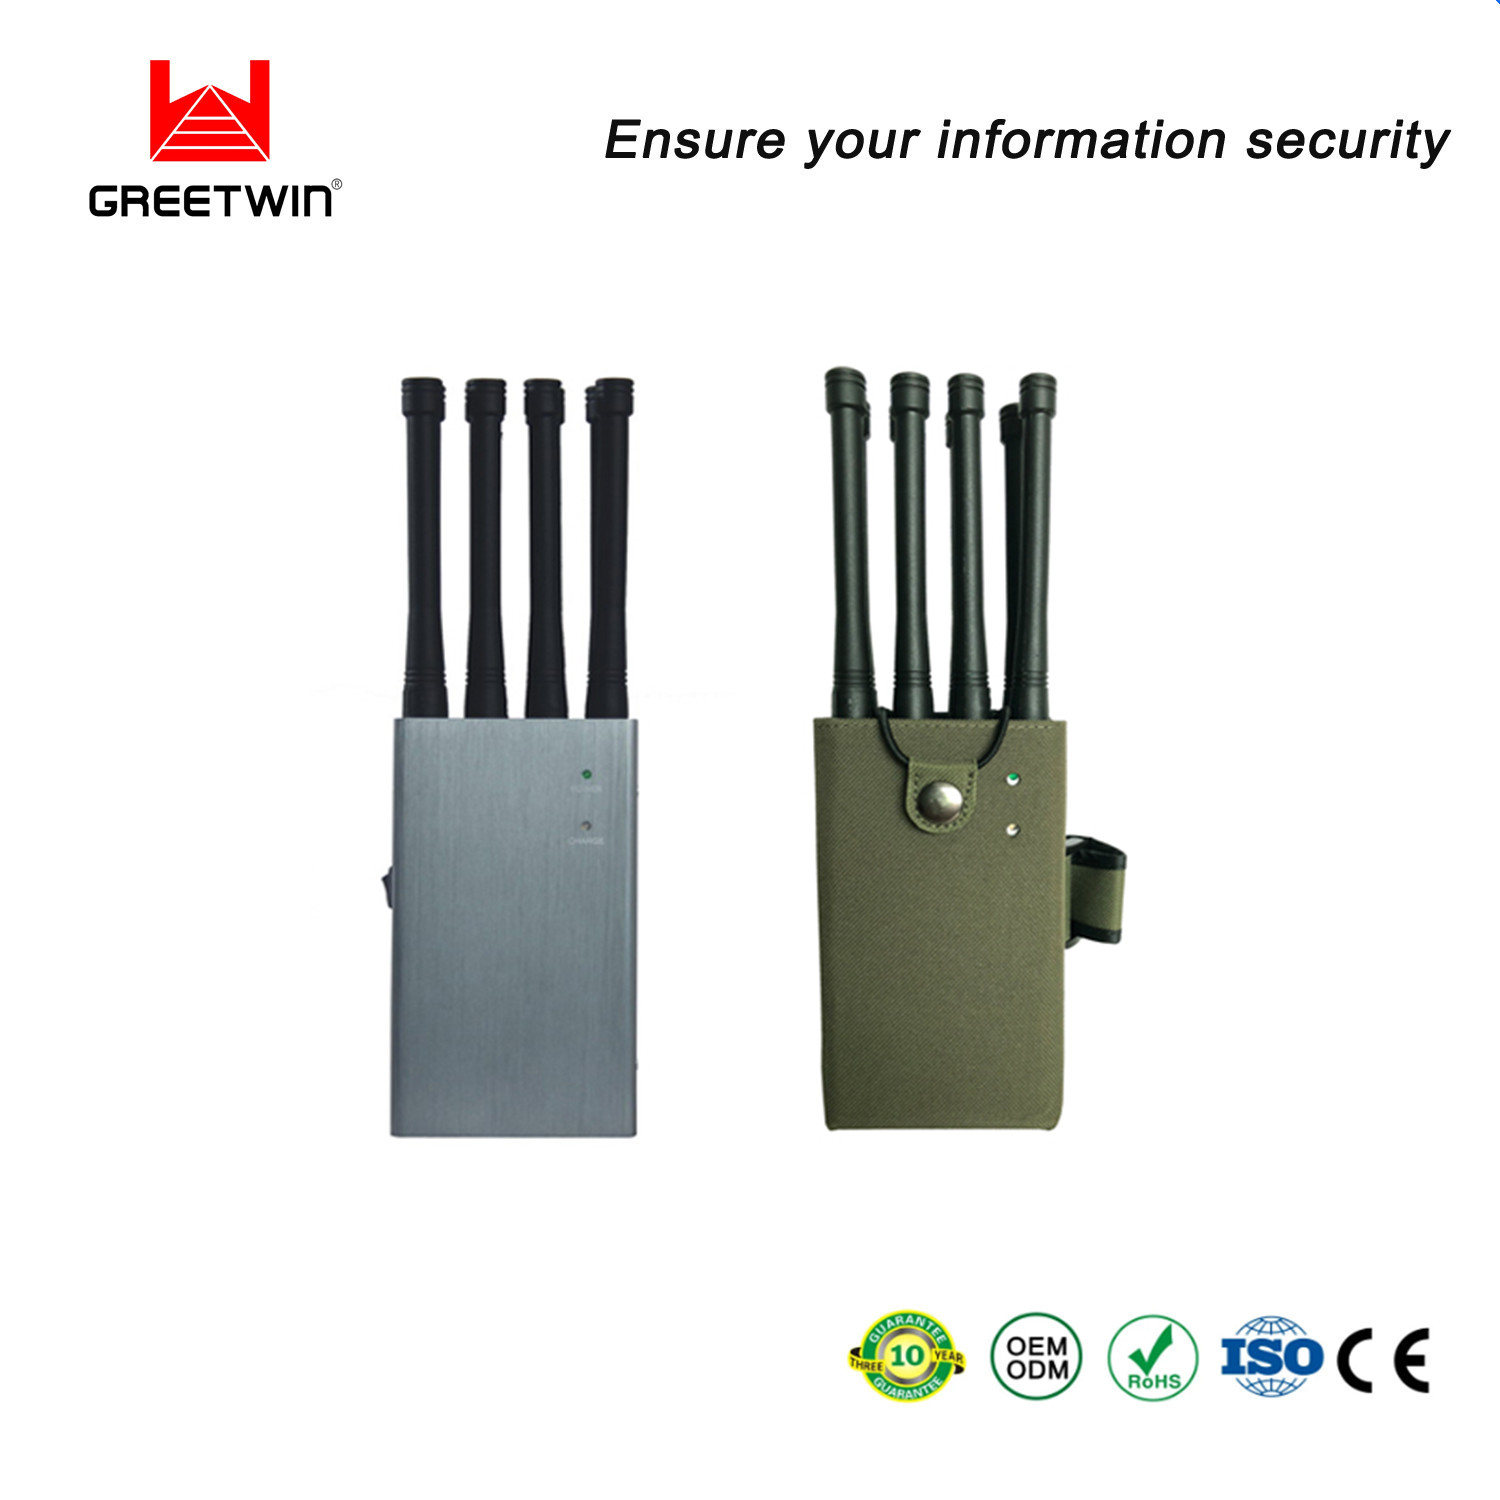 8.0W Wireless Signal GSM GPS WiFi Jammer 8 Bands Handheld